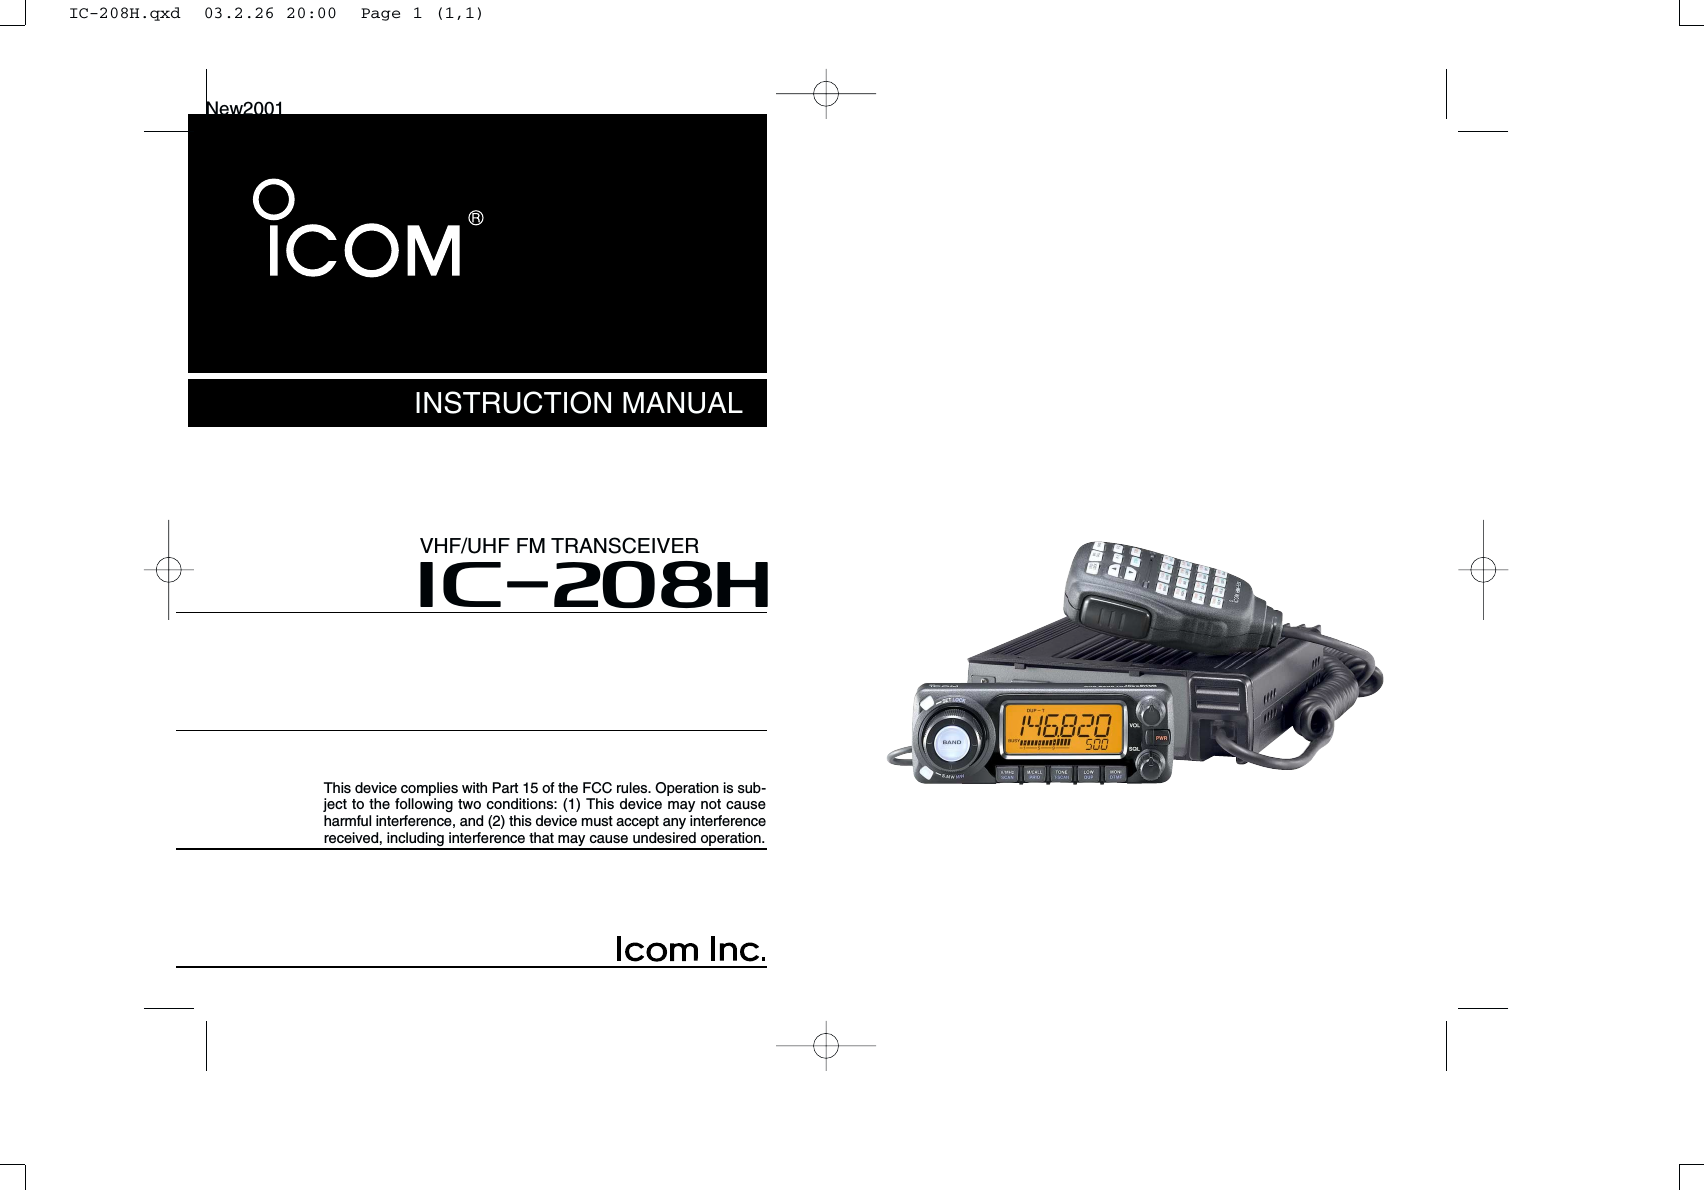 INSTRUCTION MANUALi208HVHF/UHF FM TRANSCEIVERThis device complies with Part 15 of the FCC rules. Operation is sub-ject to the following two conditions: (1) This device may not causeharmful interference, and (2) this device must accept any interferencereceived, including interference that may cause undesired operation.New2001IC-208H.qxd  03.2.26 20:00  Page 1 (1,1)